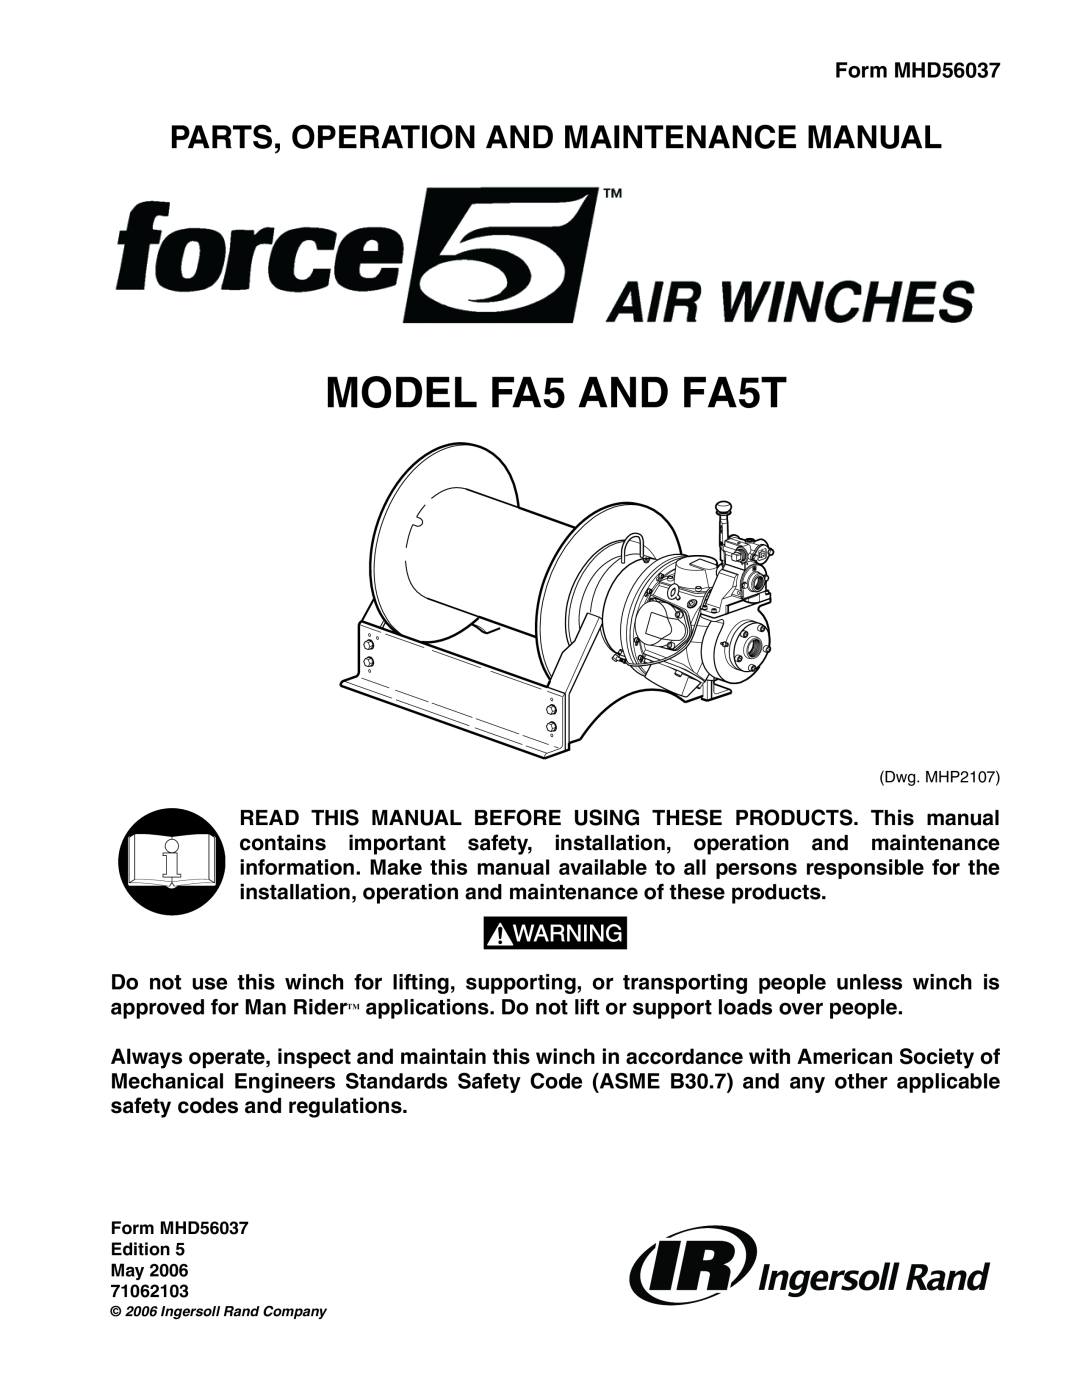 Ingersoll-Rand LS500RLP-E, HU40A, Fulcrum Electric manual Important Information, Form MHD56298, Winch Man Rider Supplements 